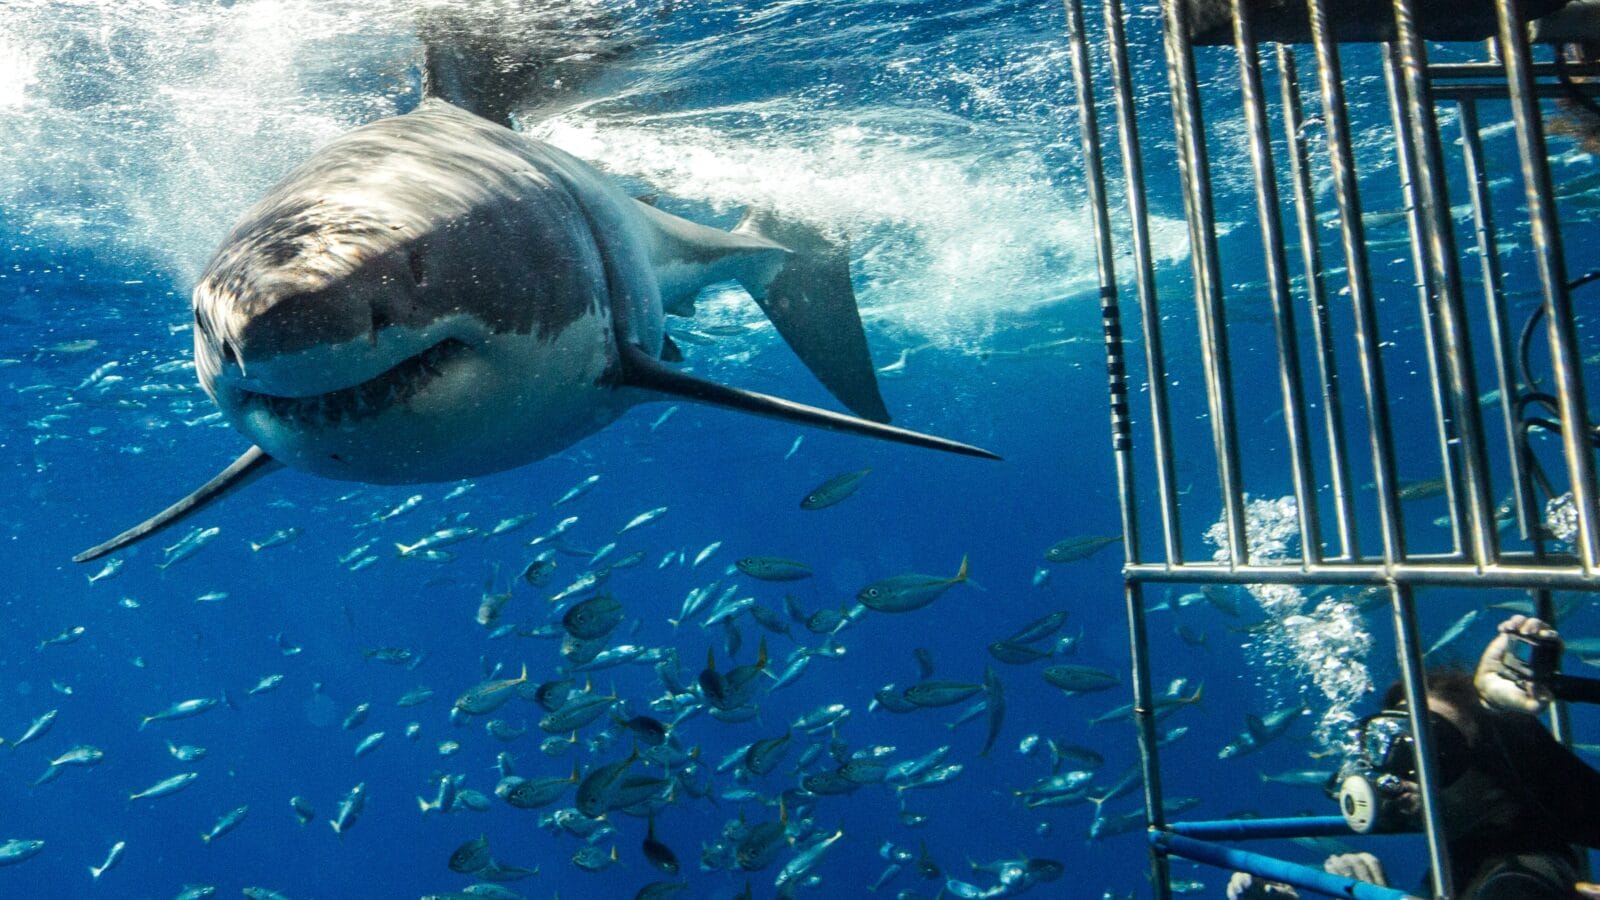 Cage diving with a great white shark.